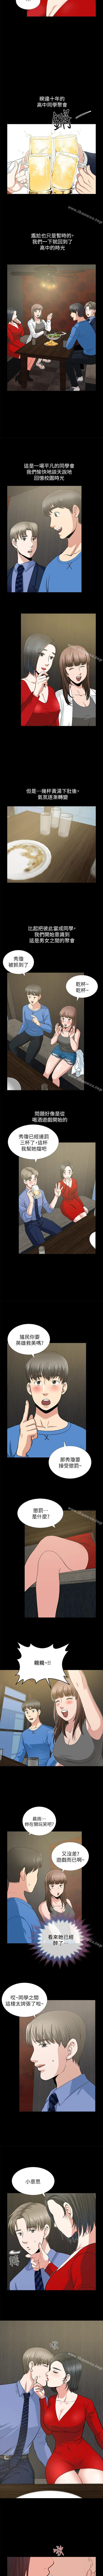 Spa 朋友妻 1-36 Relax - Page 10